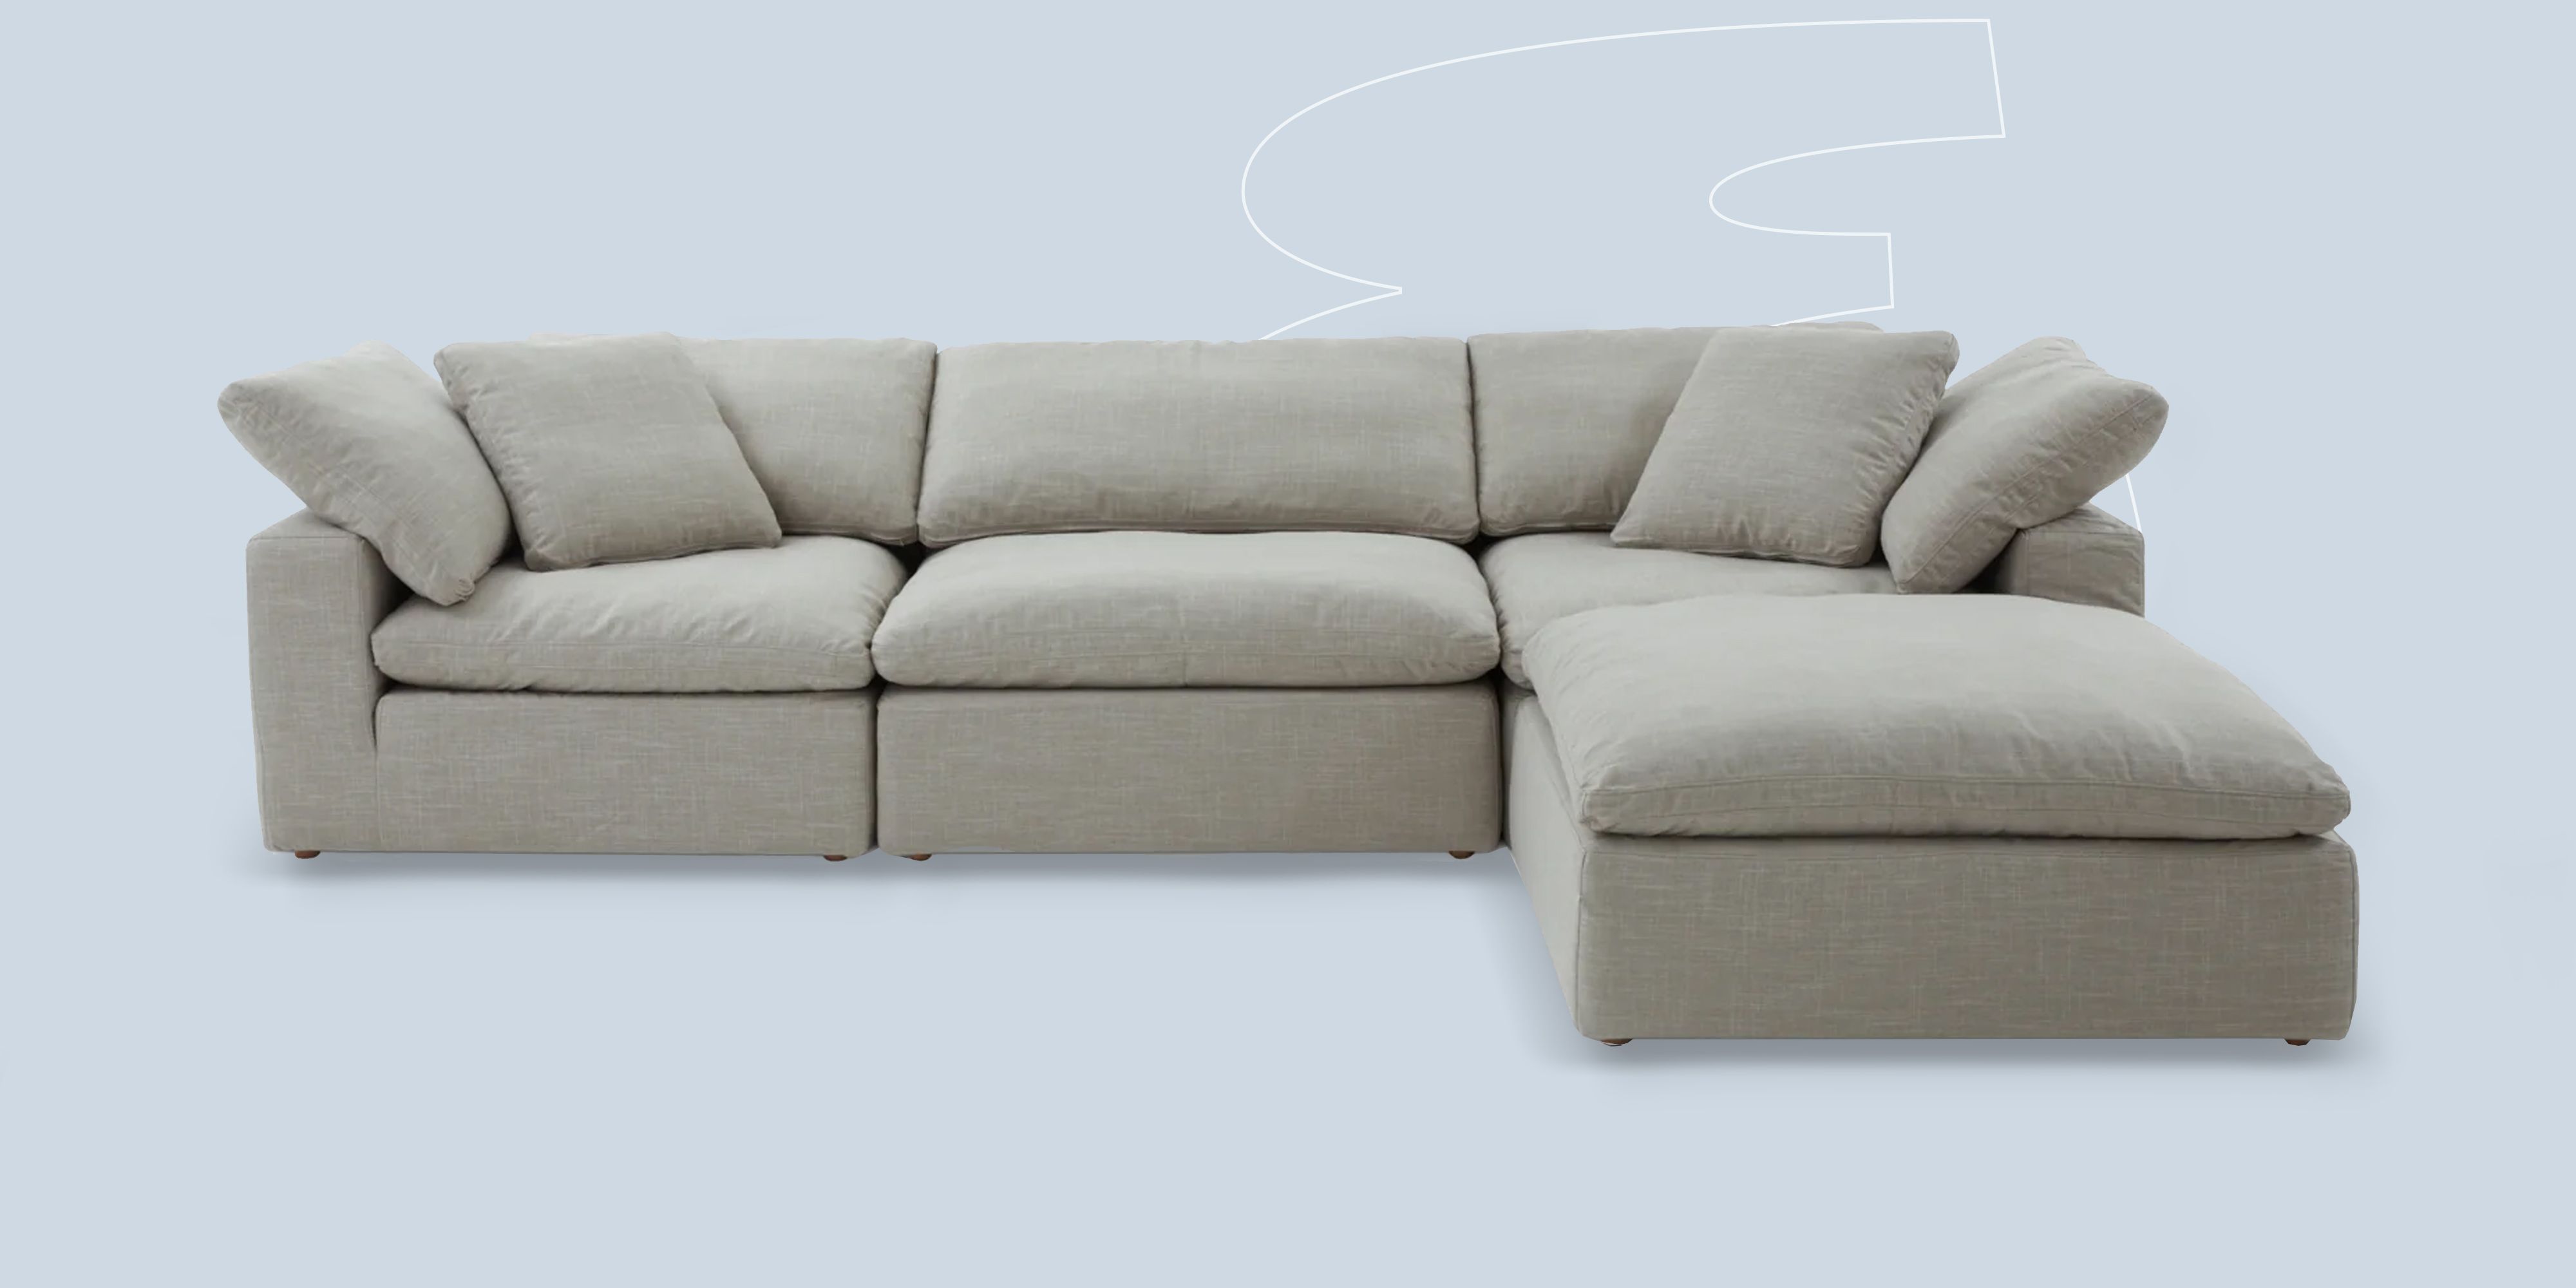 Sit Tests: My Three Favorite Sofas from West Elm